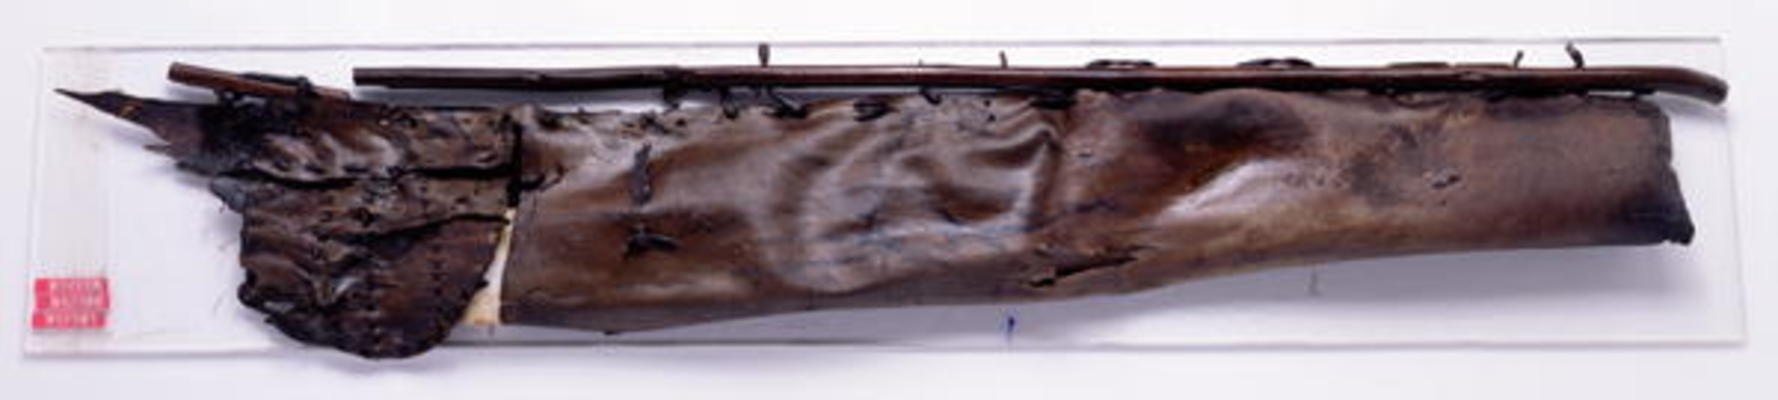 Quiver found with the Oetzi Iceman (chamois leather) from Copper Age